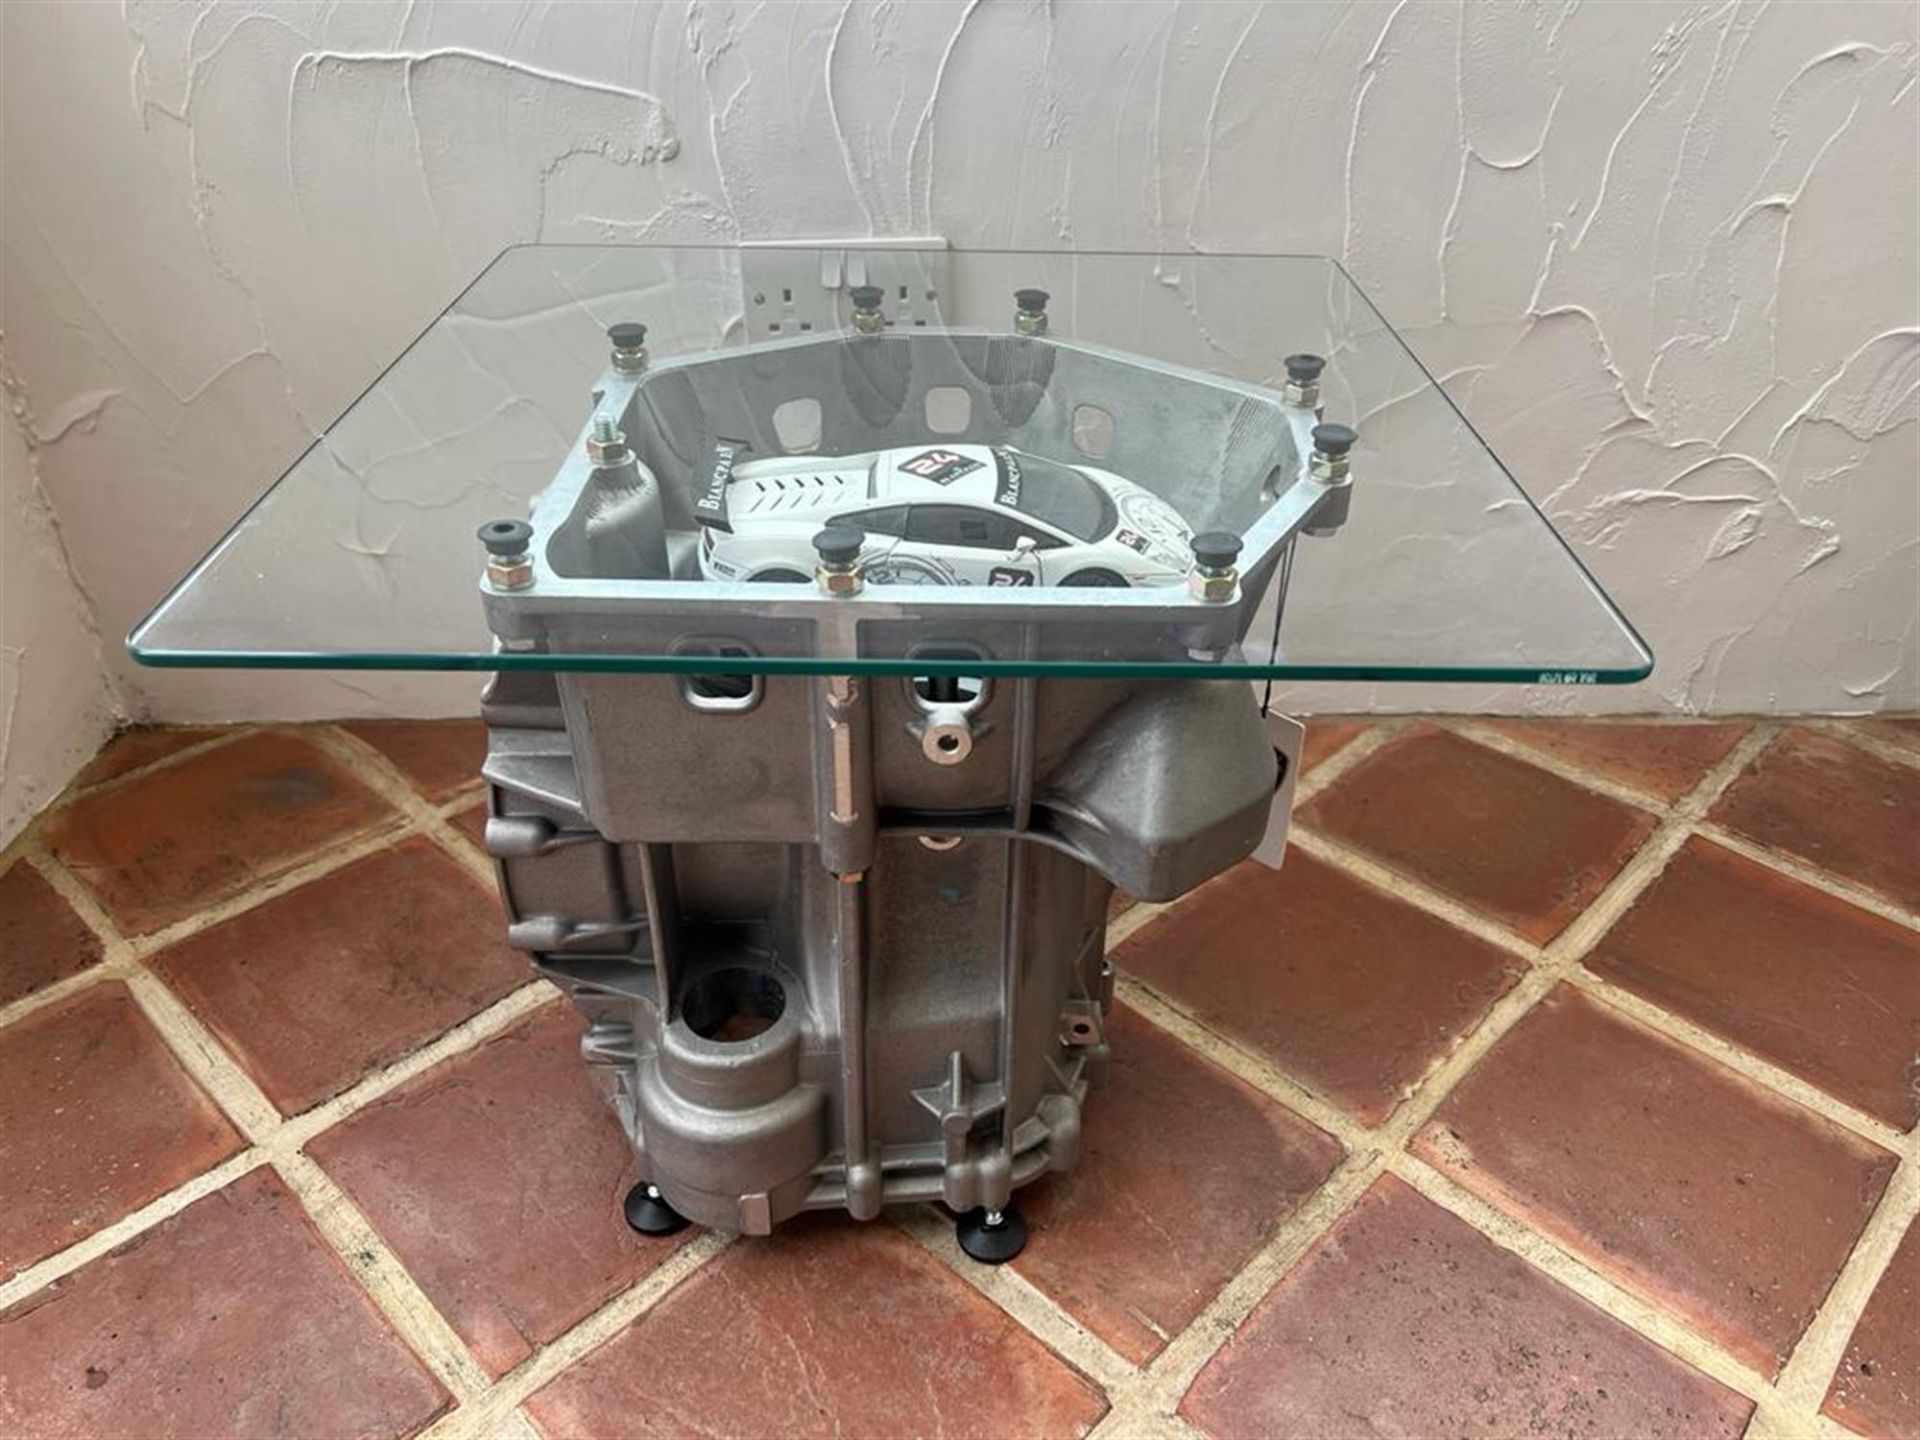 Lamborghini Gearbox-Themed Coffee Table - Image 4 of 4